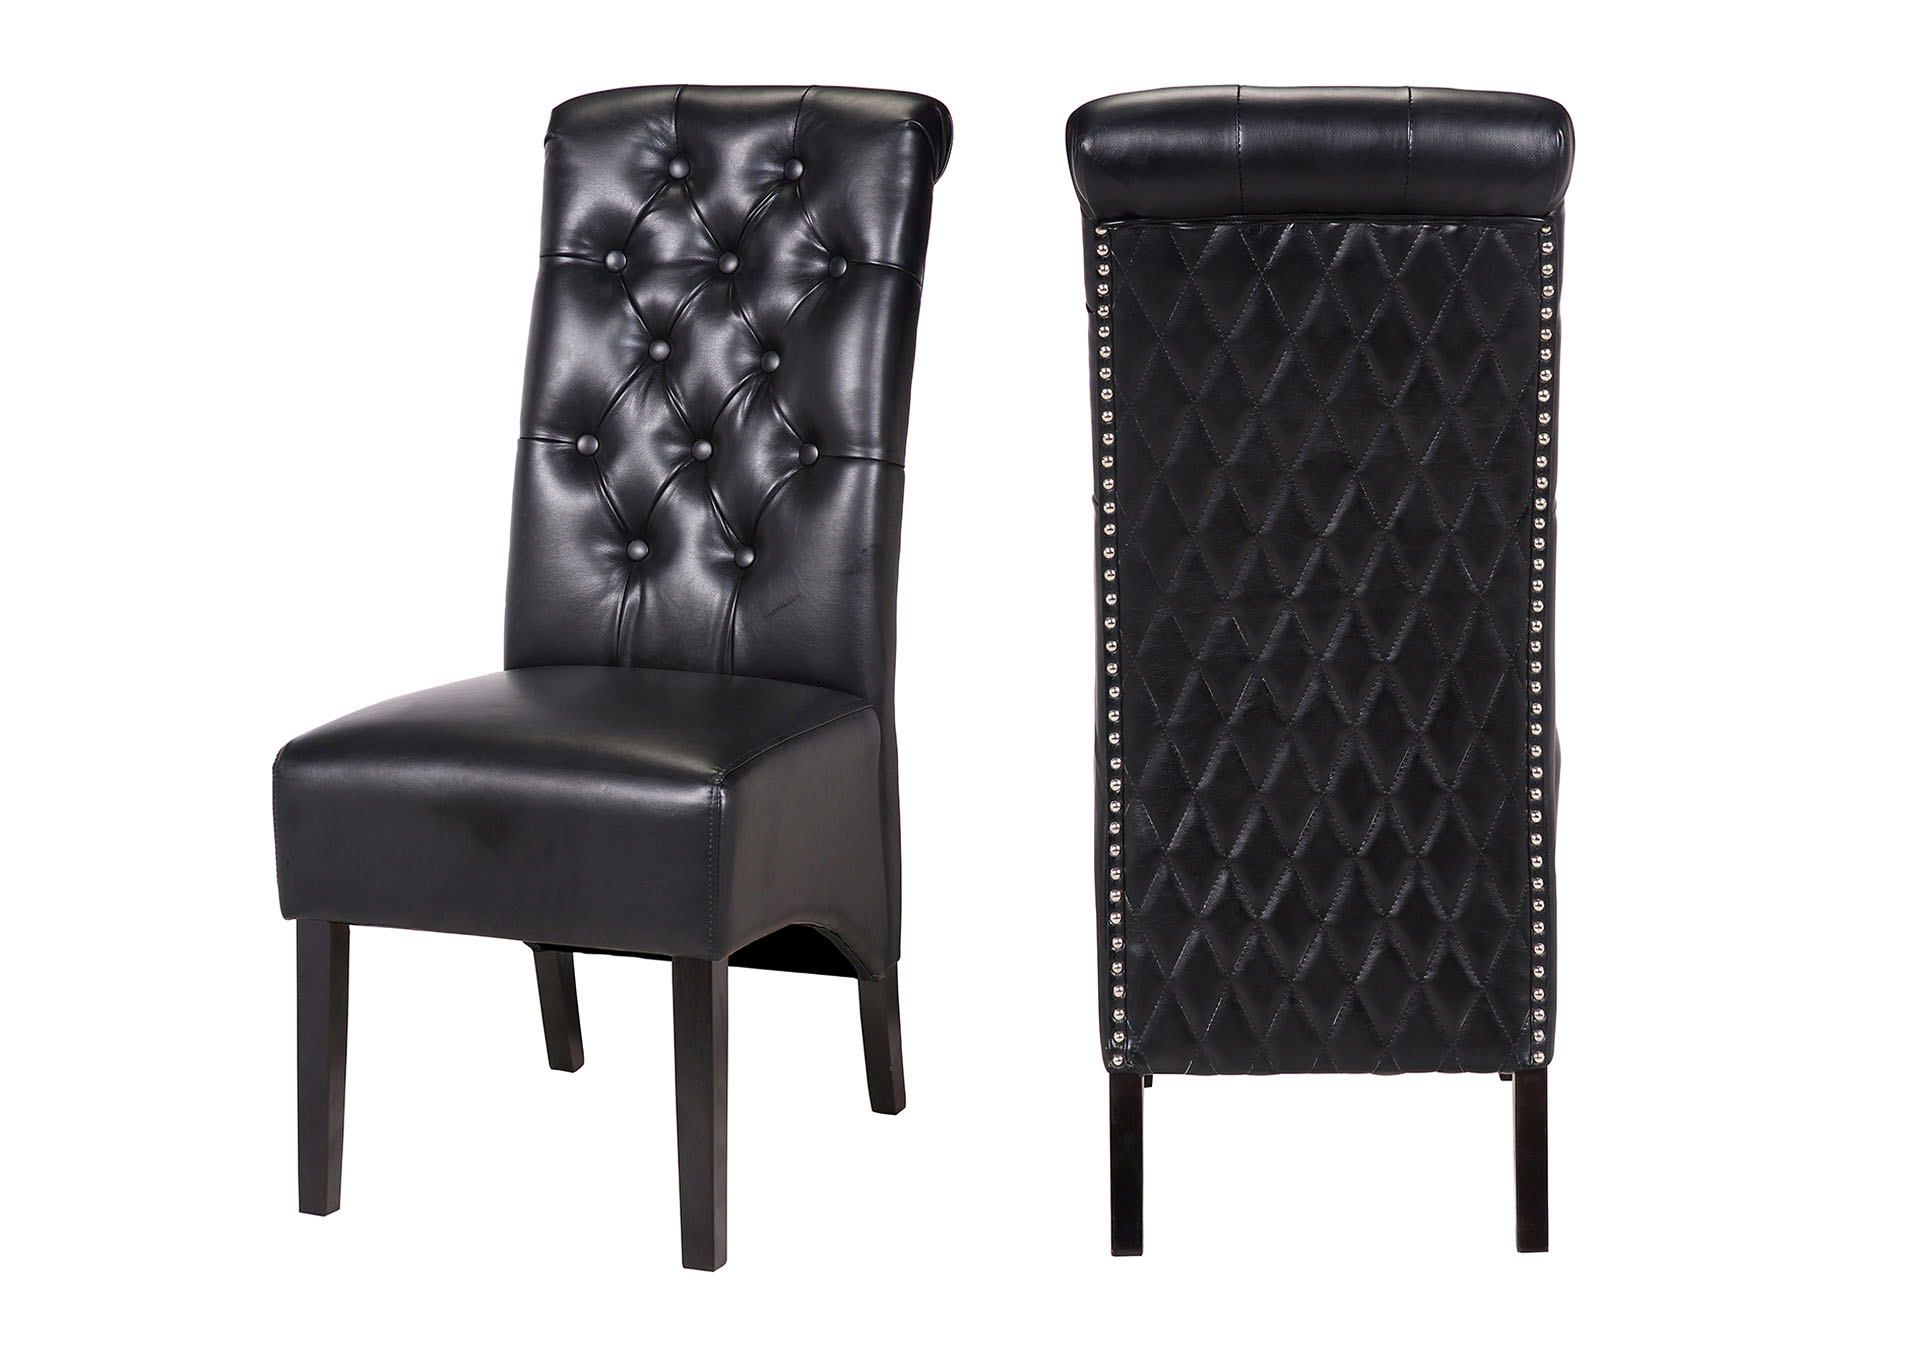 Lucy Black Accent chairs / dining chairs,Galaxy Home Furniture